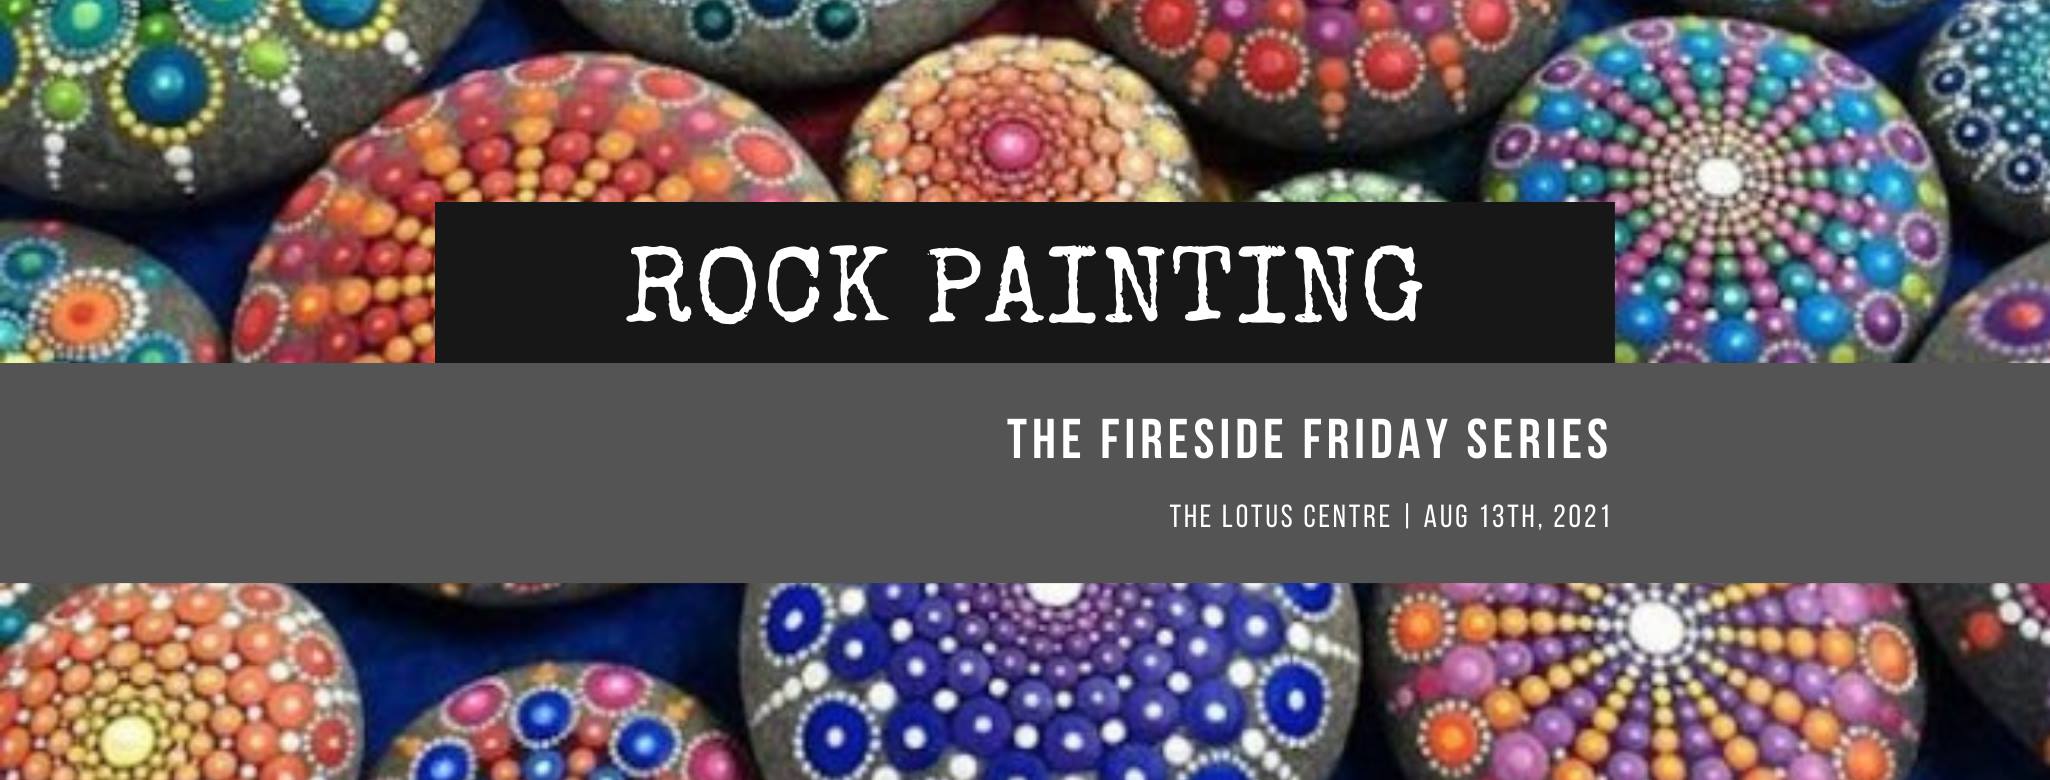 Rock Painting Fireside Friday